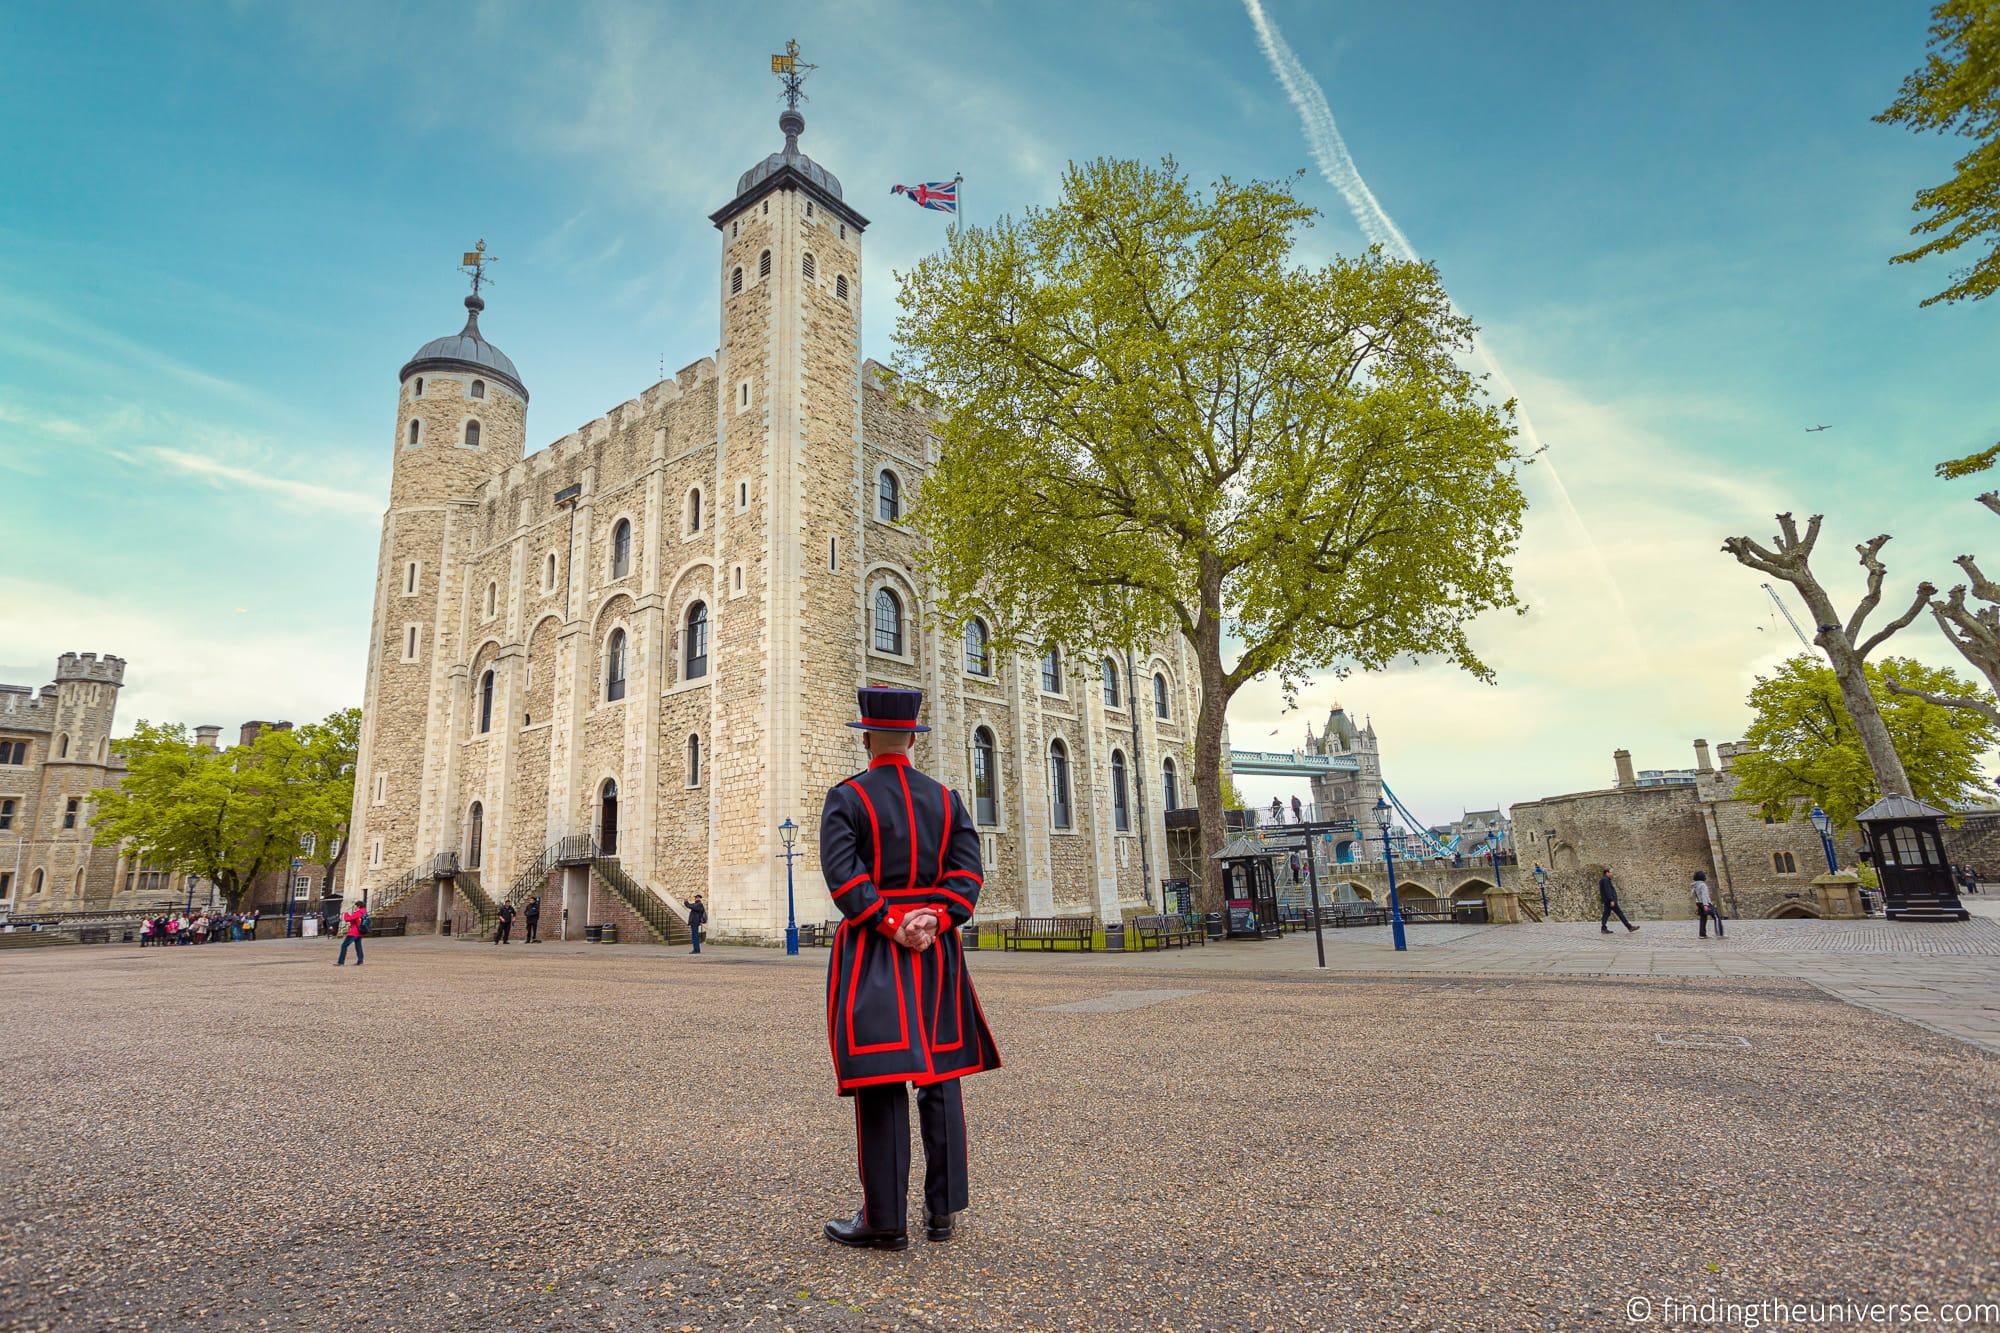 Beefeater in front of White Tower